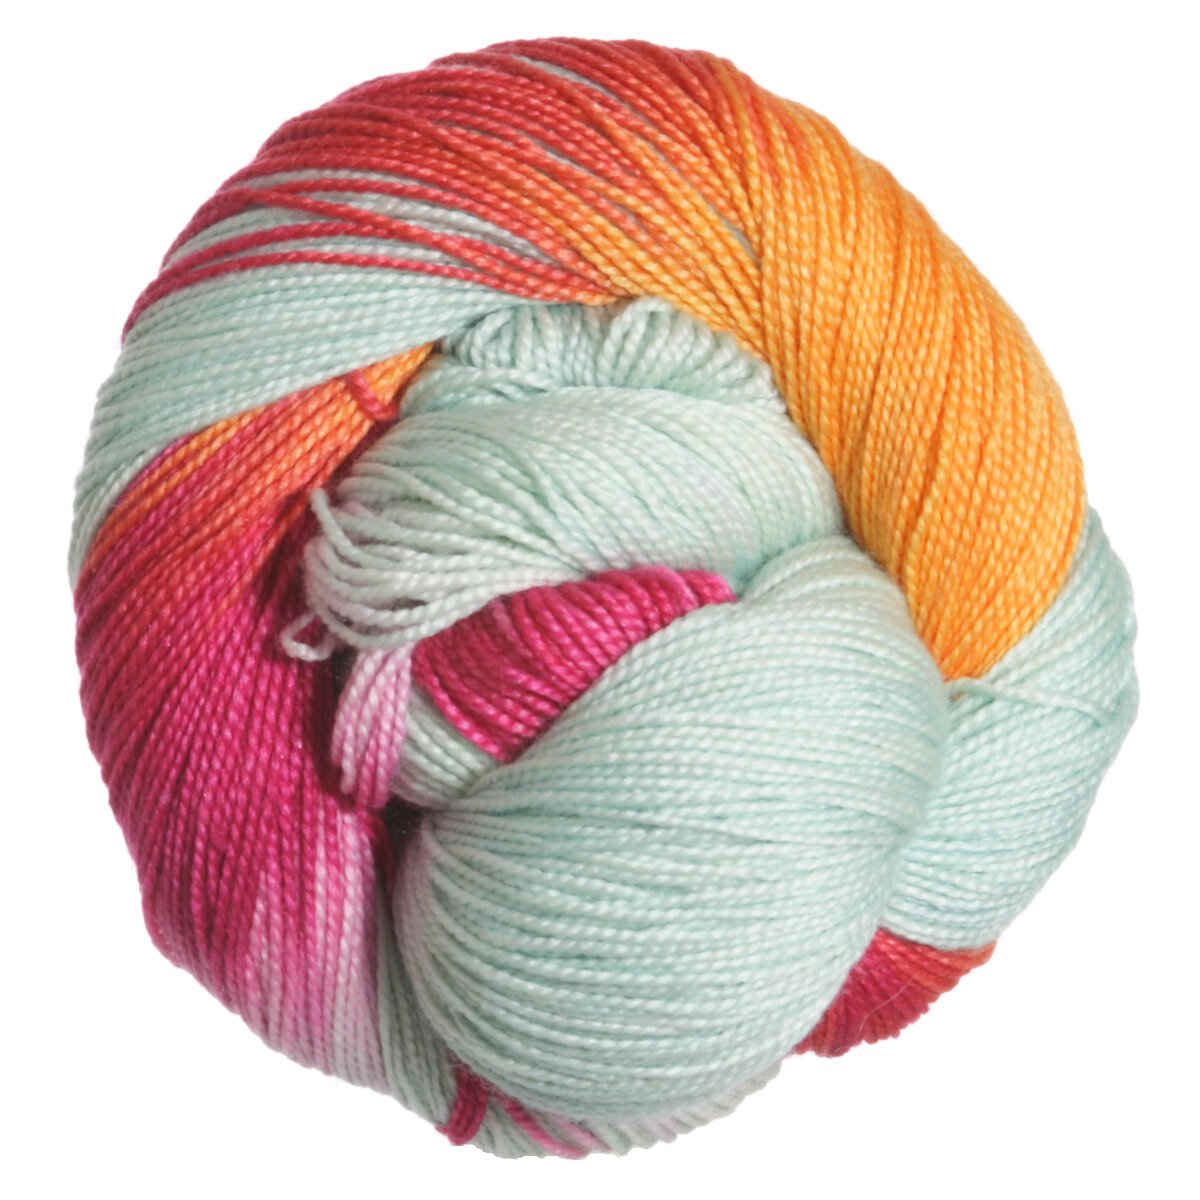 Best Yarn Prices - How do you Price a Switches?